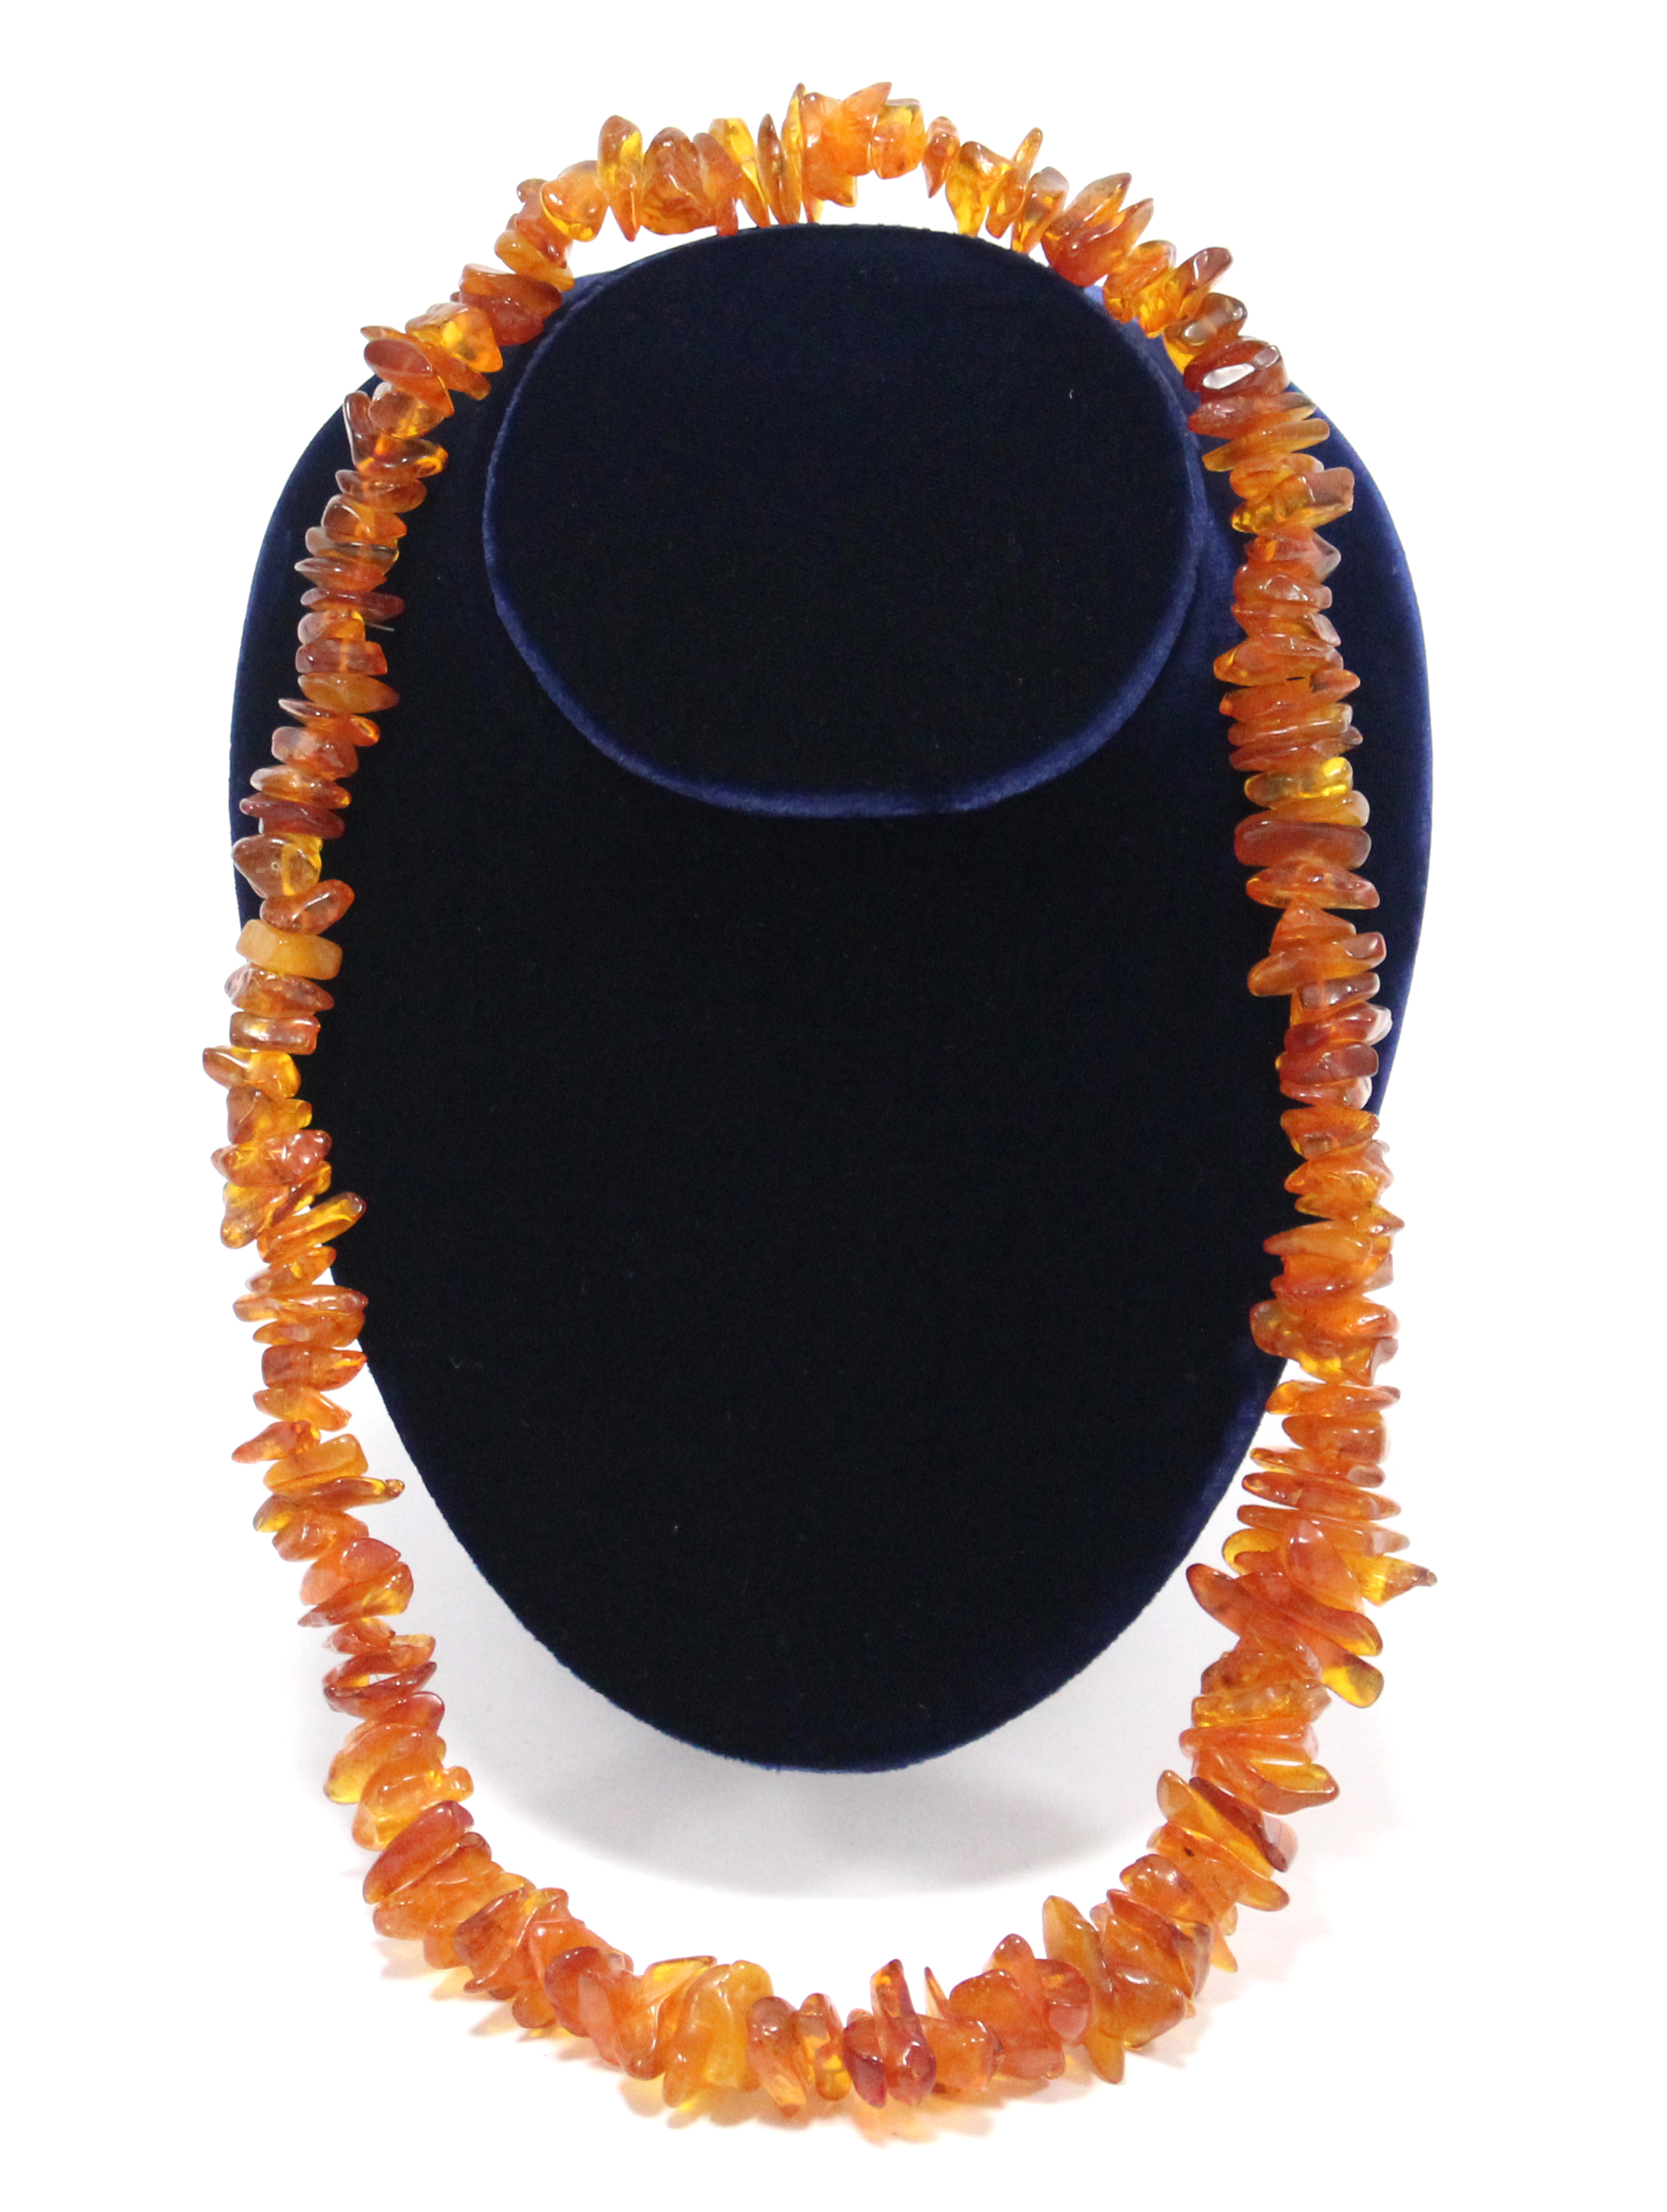 A Baltic amber necklace of graduated irregular-shaped segments; approx. 27” long.